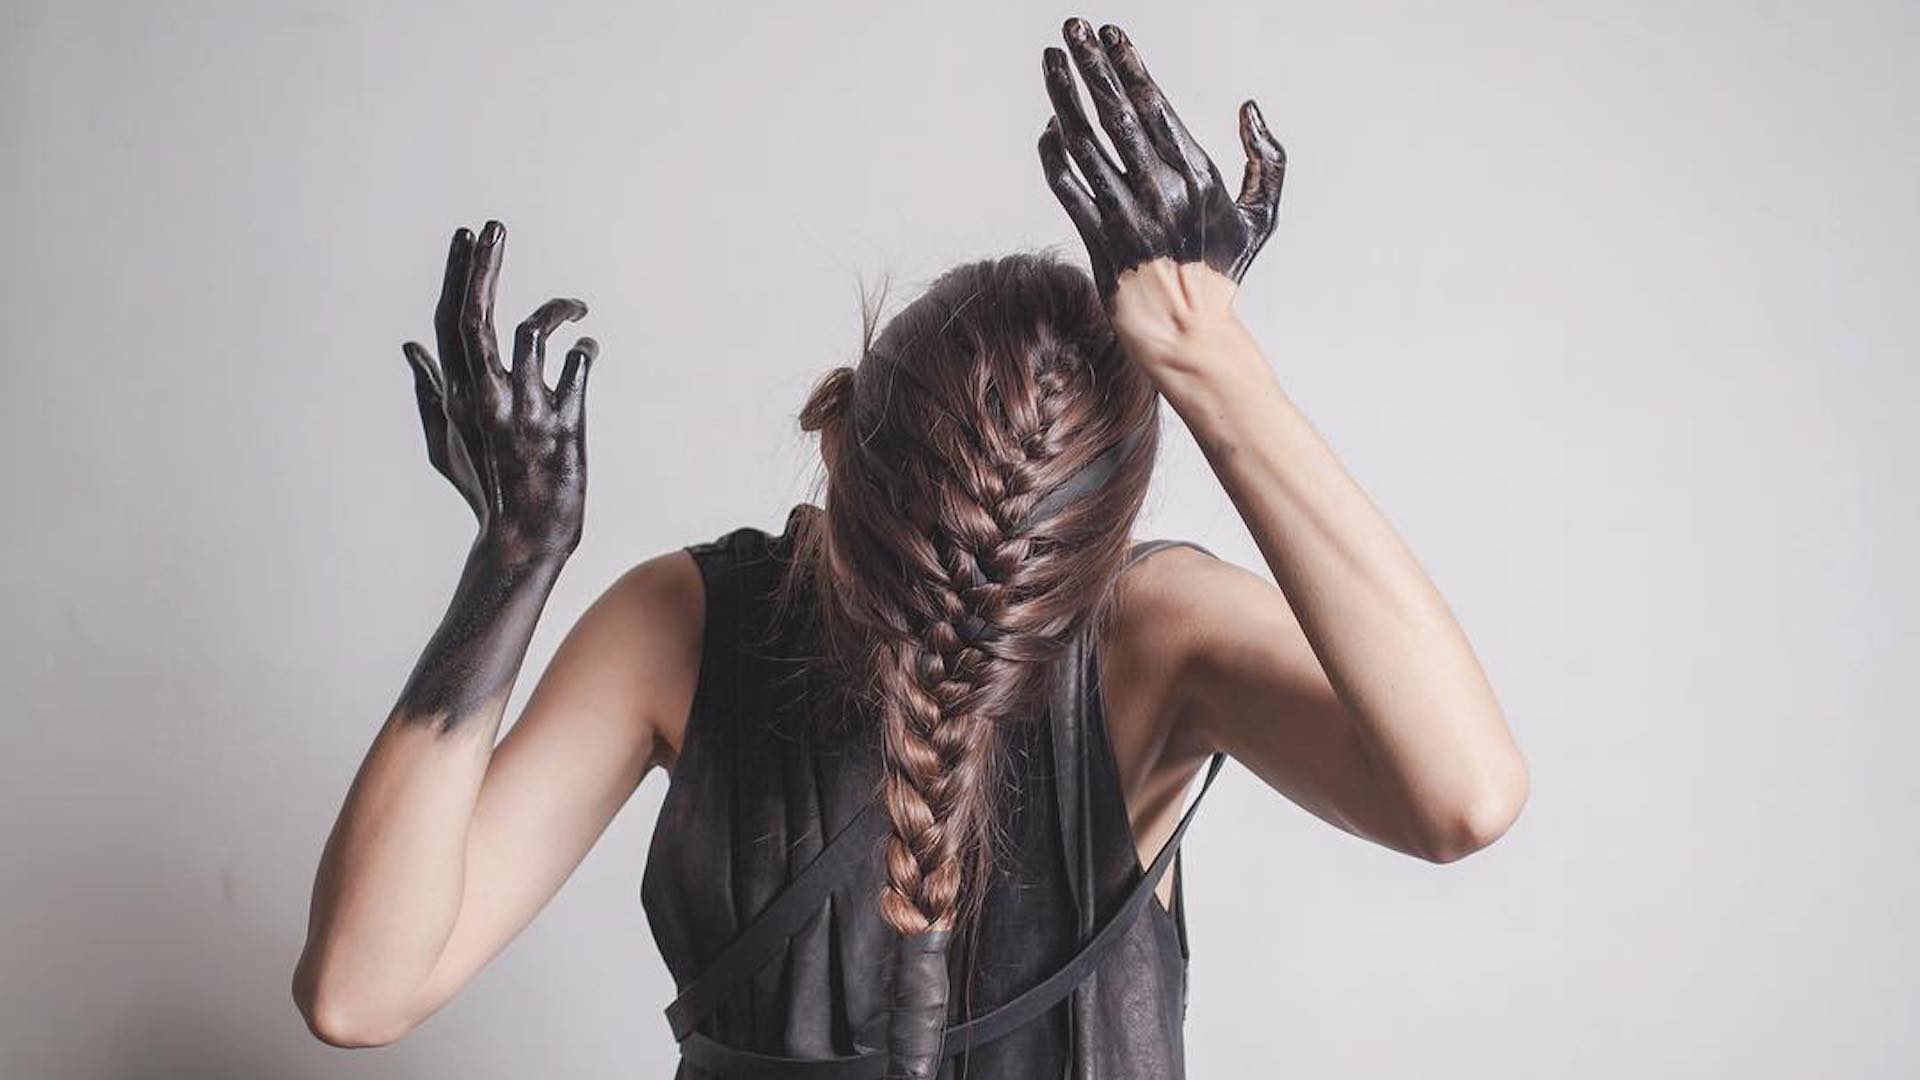 This week in Editors' Choice: Tousled hair and outstretched hands